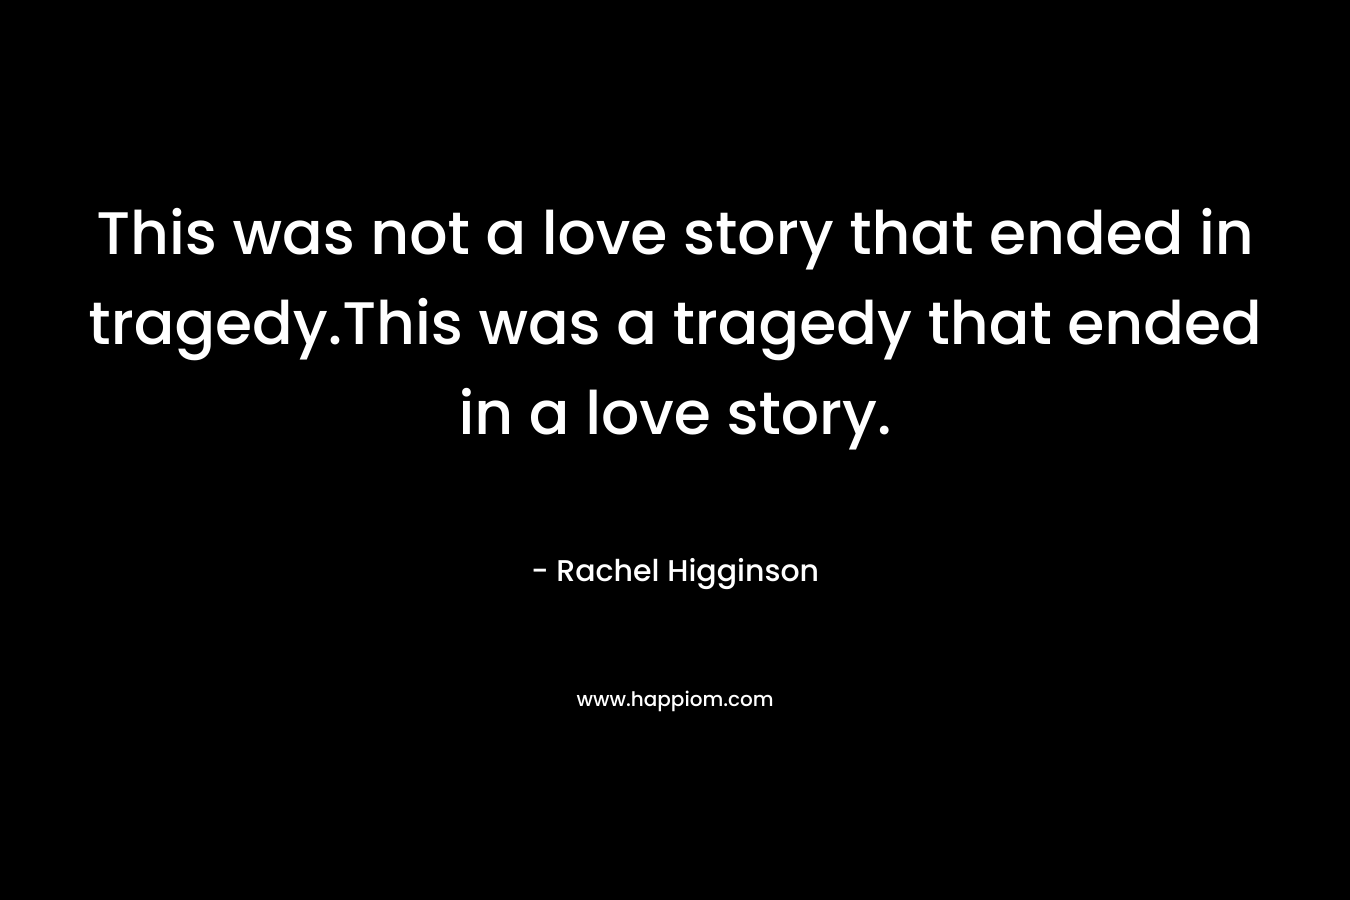 This was not a love story that ended in tragedy.This was a tragedy that ended in a love story.